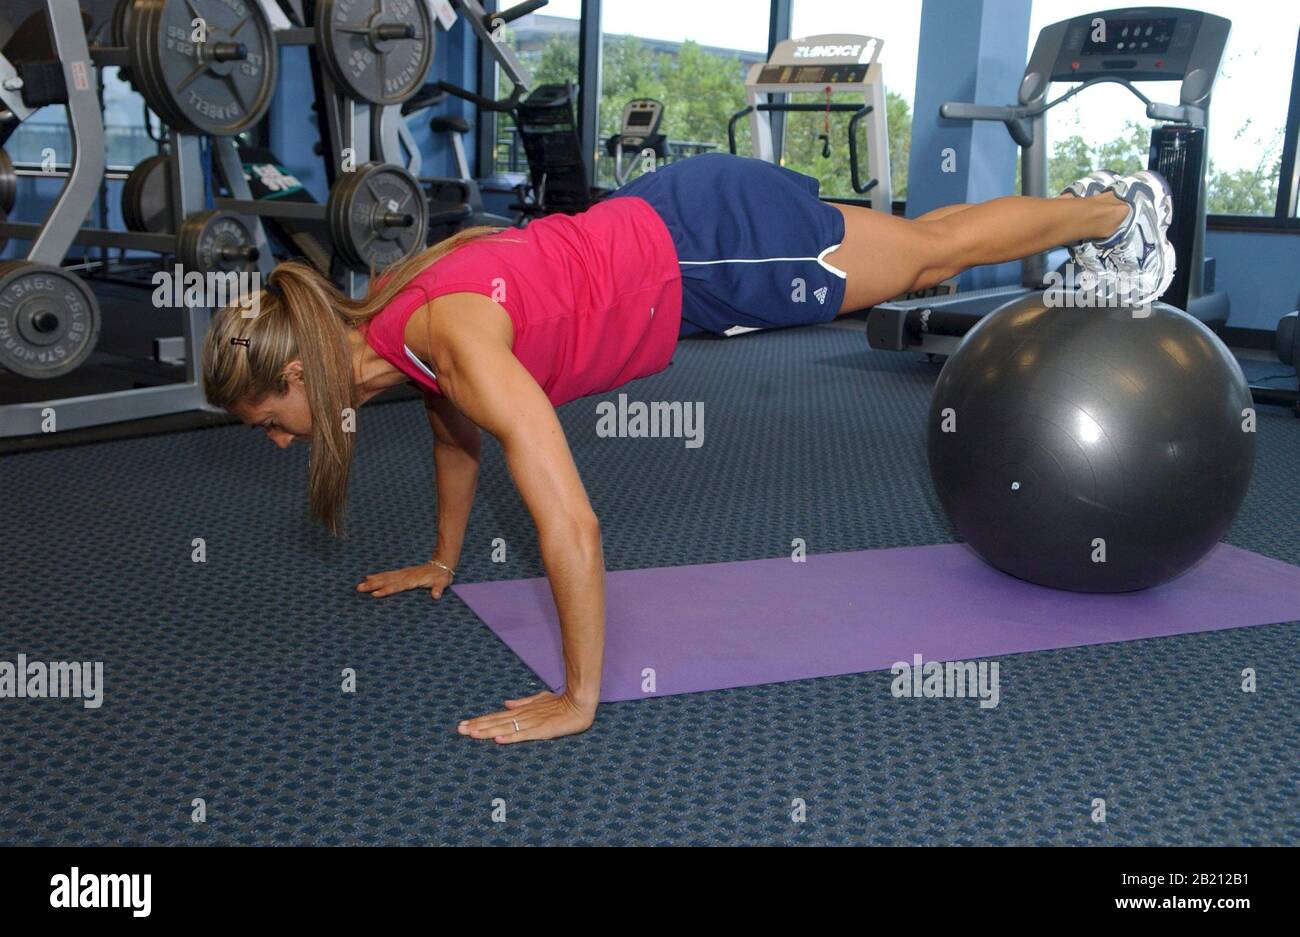 Austin, Texas  Woman in her late 20s works out on a floor mat with exercise ball  at a modern gym.  MR September 2004  ©Bob Daemmrich Stock Photo